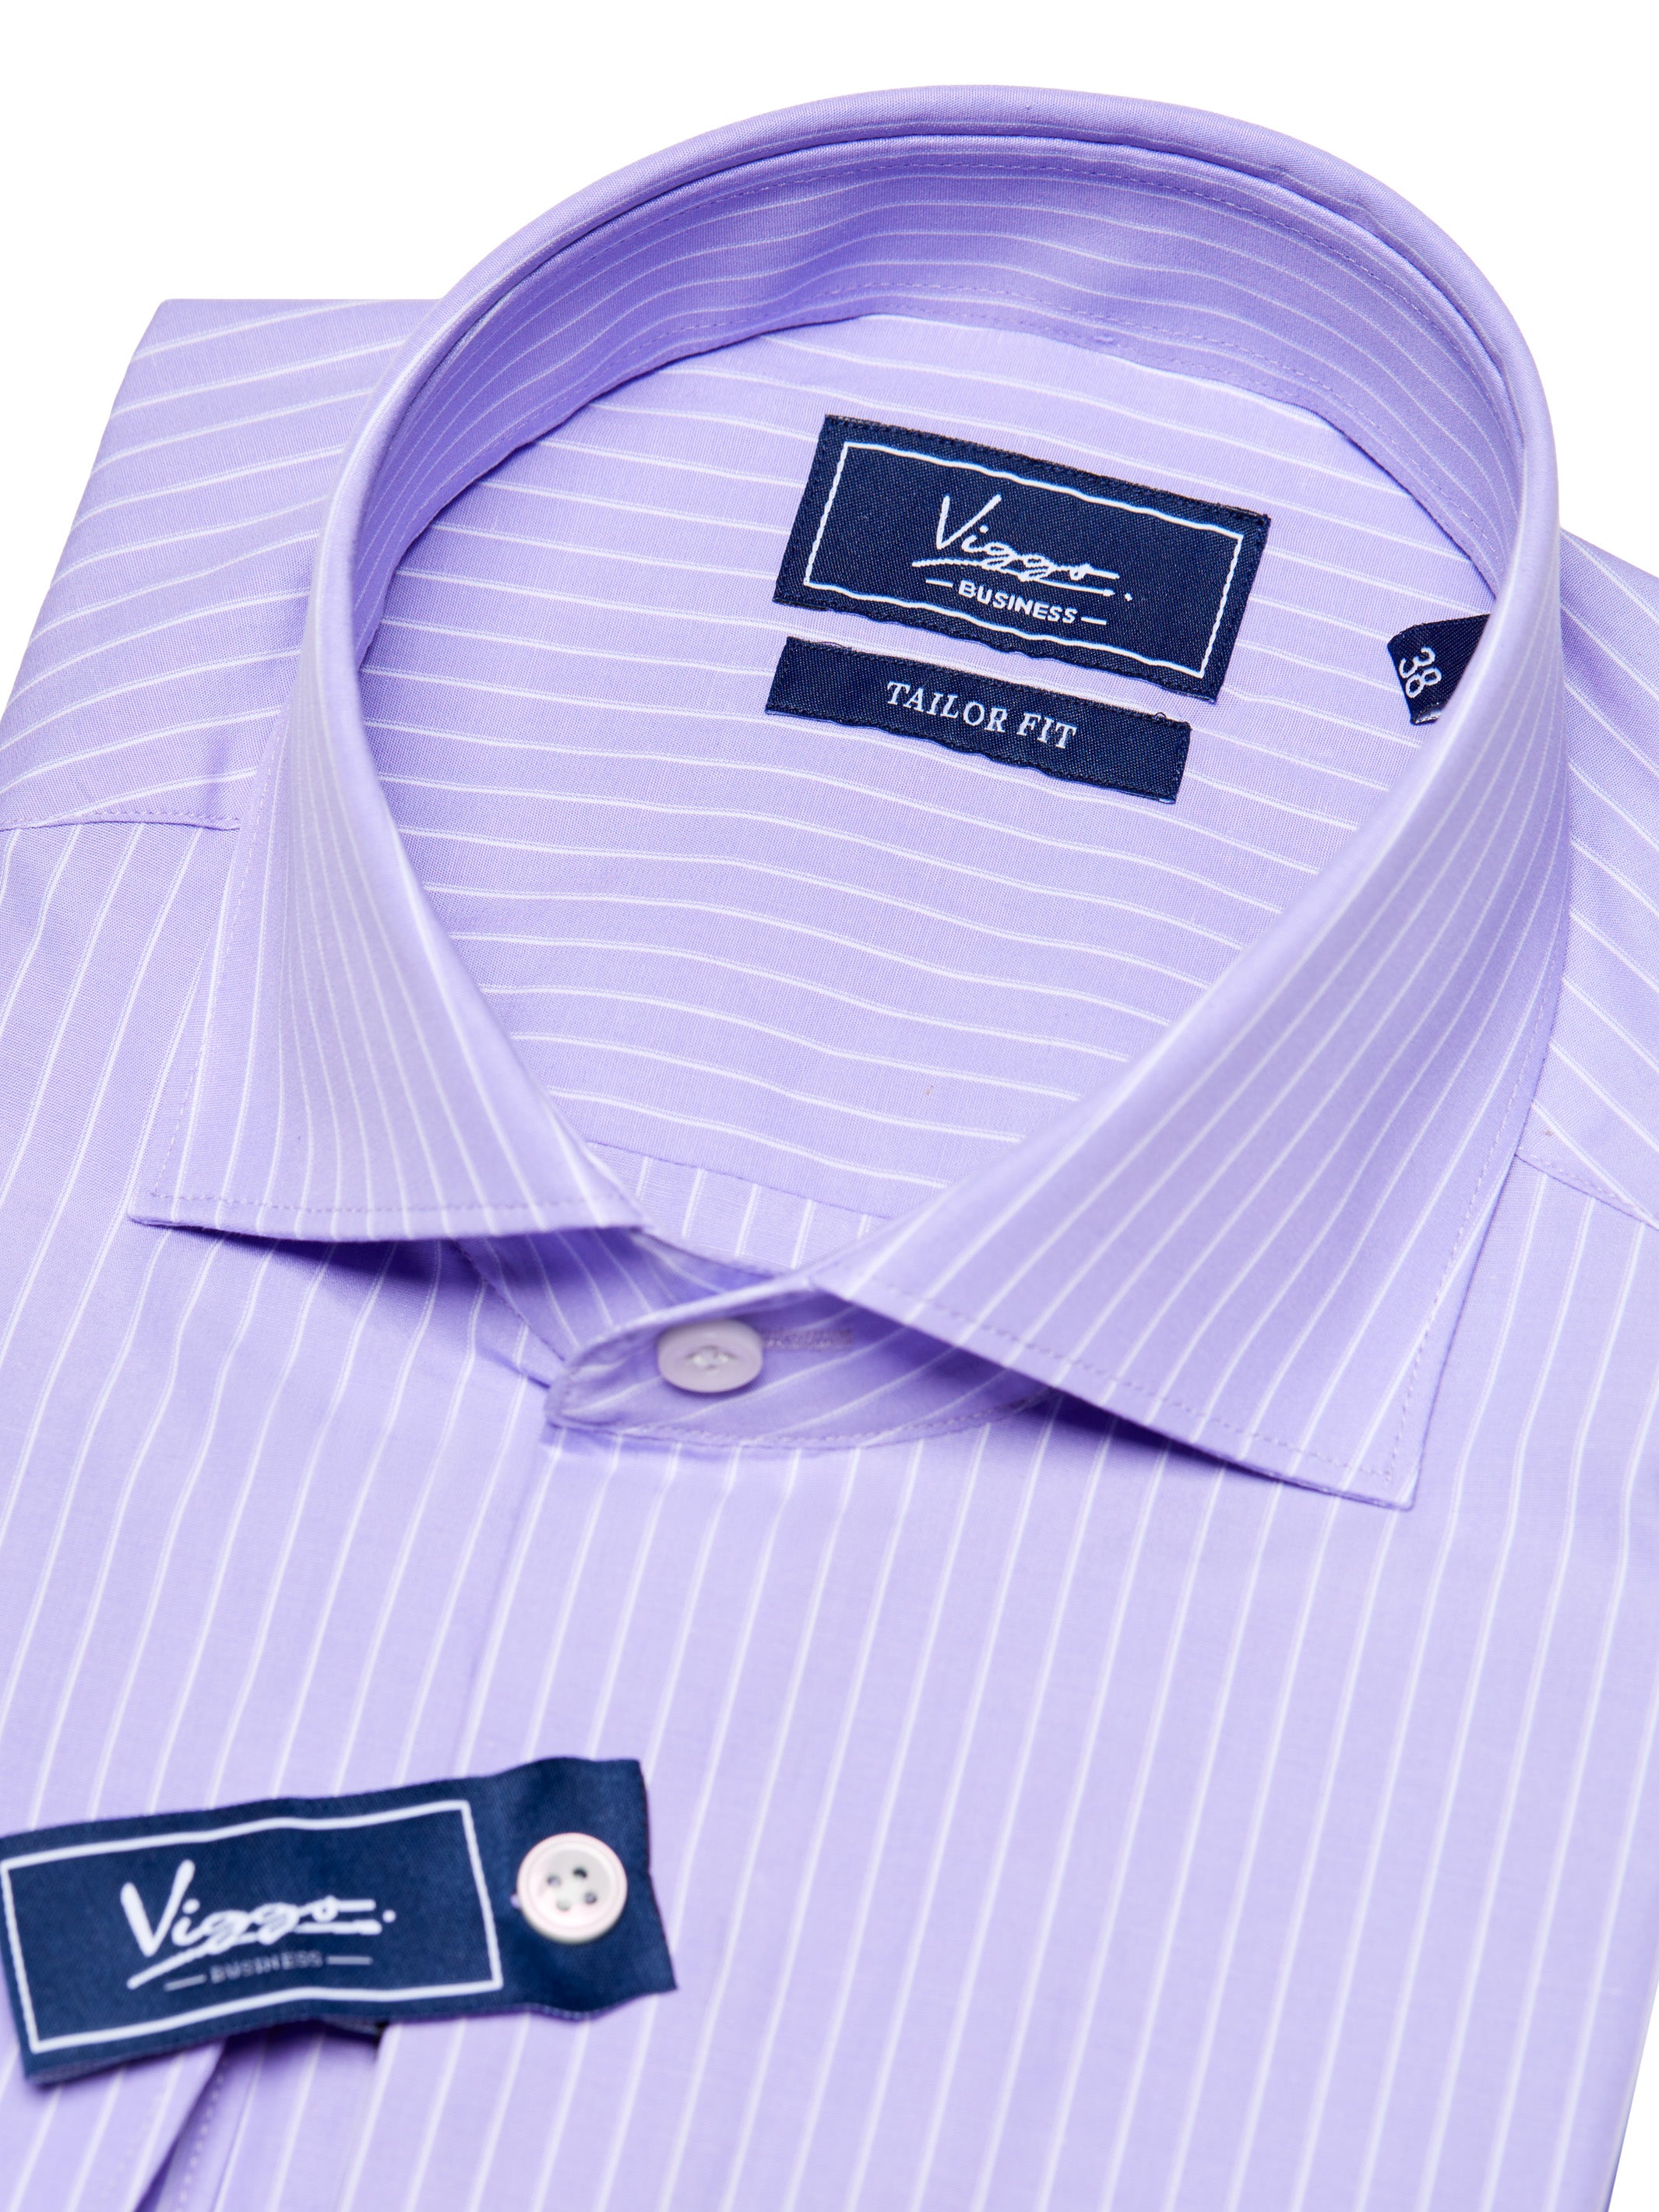 Lilac shirt with white stripes